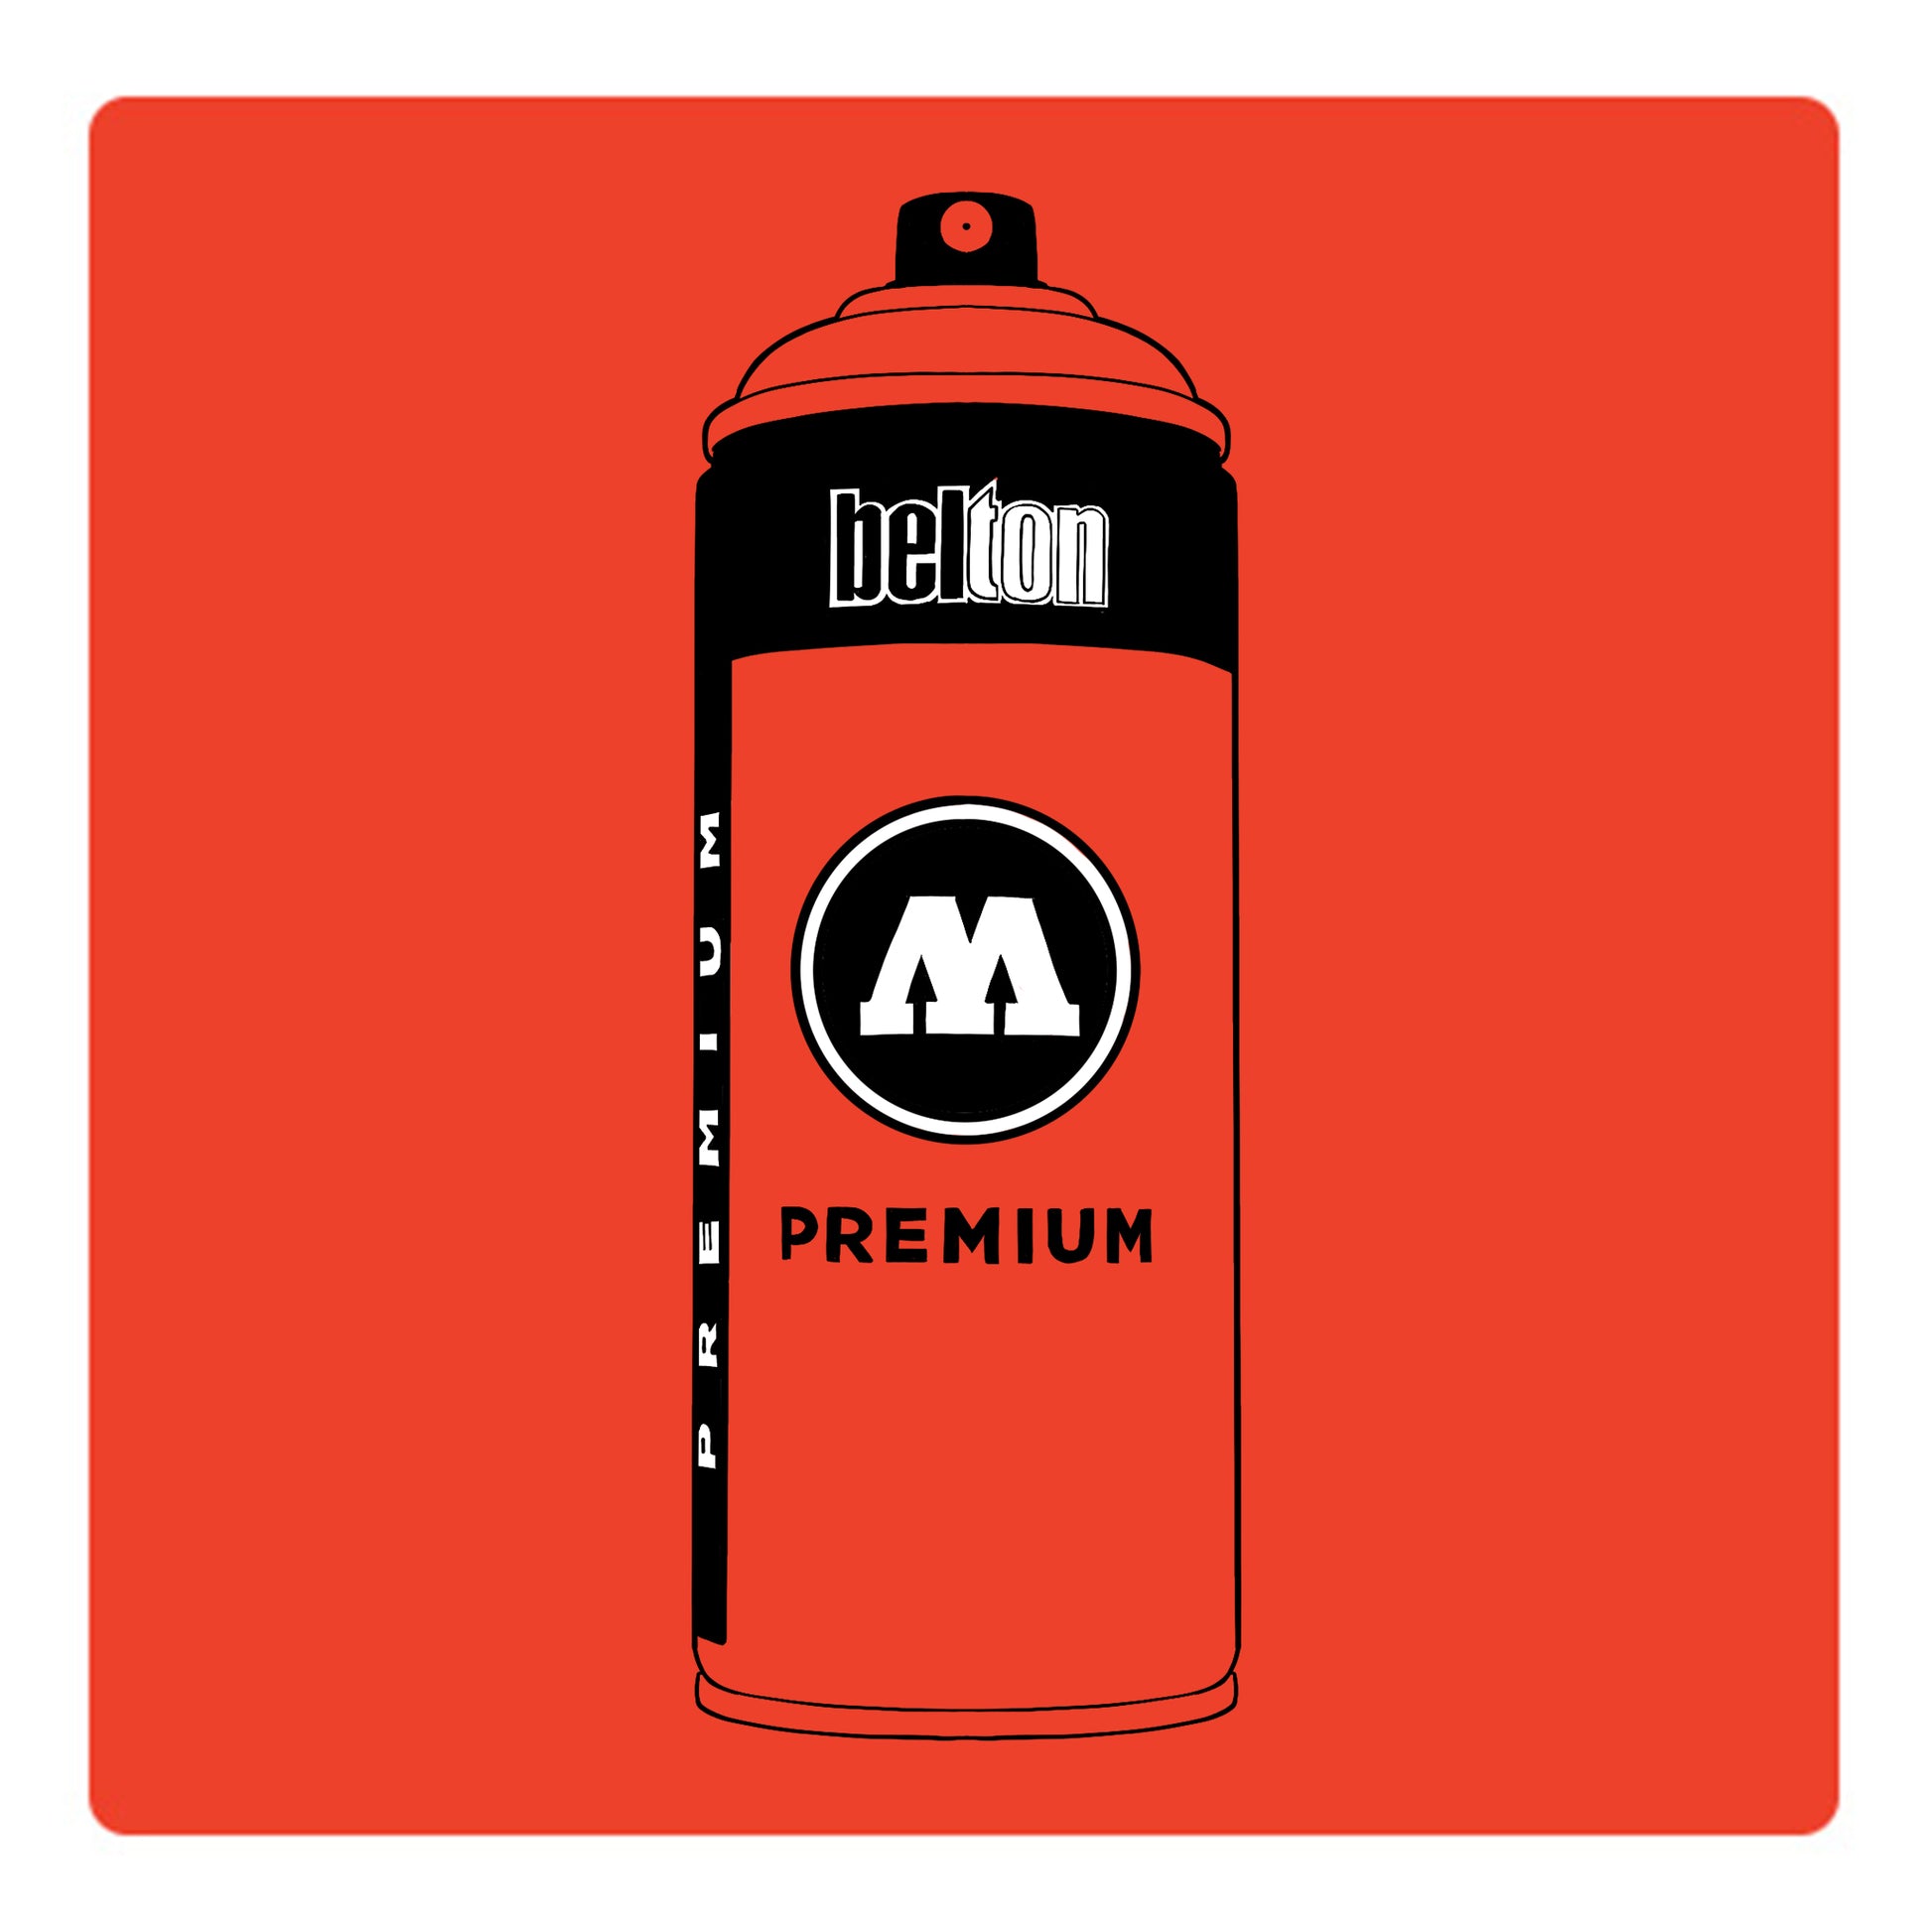 A black outline drawing of a neon orange spray paint can with the words "belton","premium" and the letter"M" written on the face in black and white font. The background is a color swatch of the same neon orange with a white border.